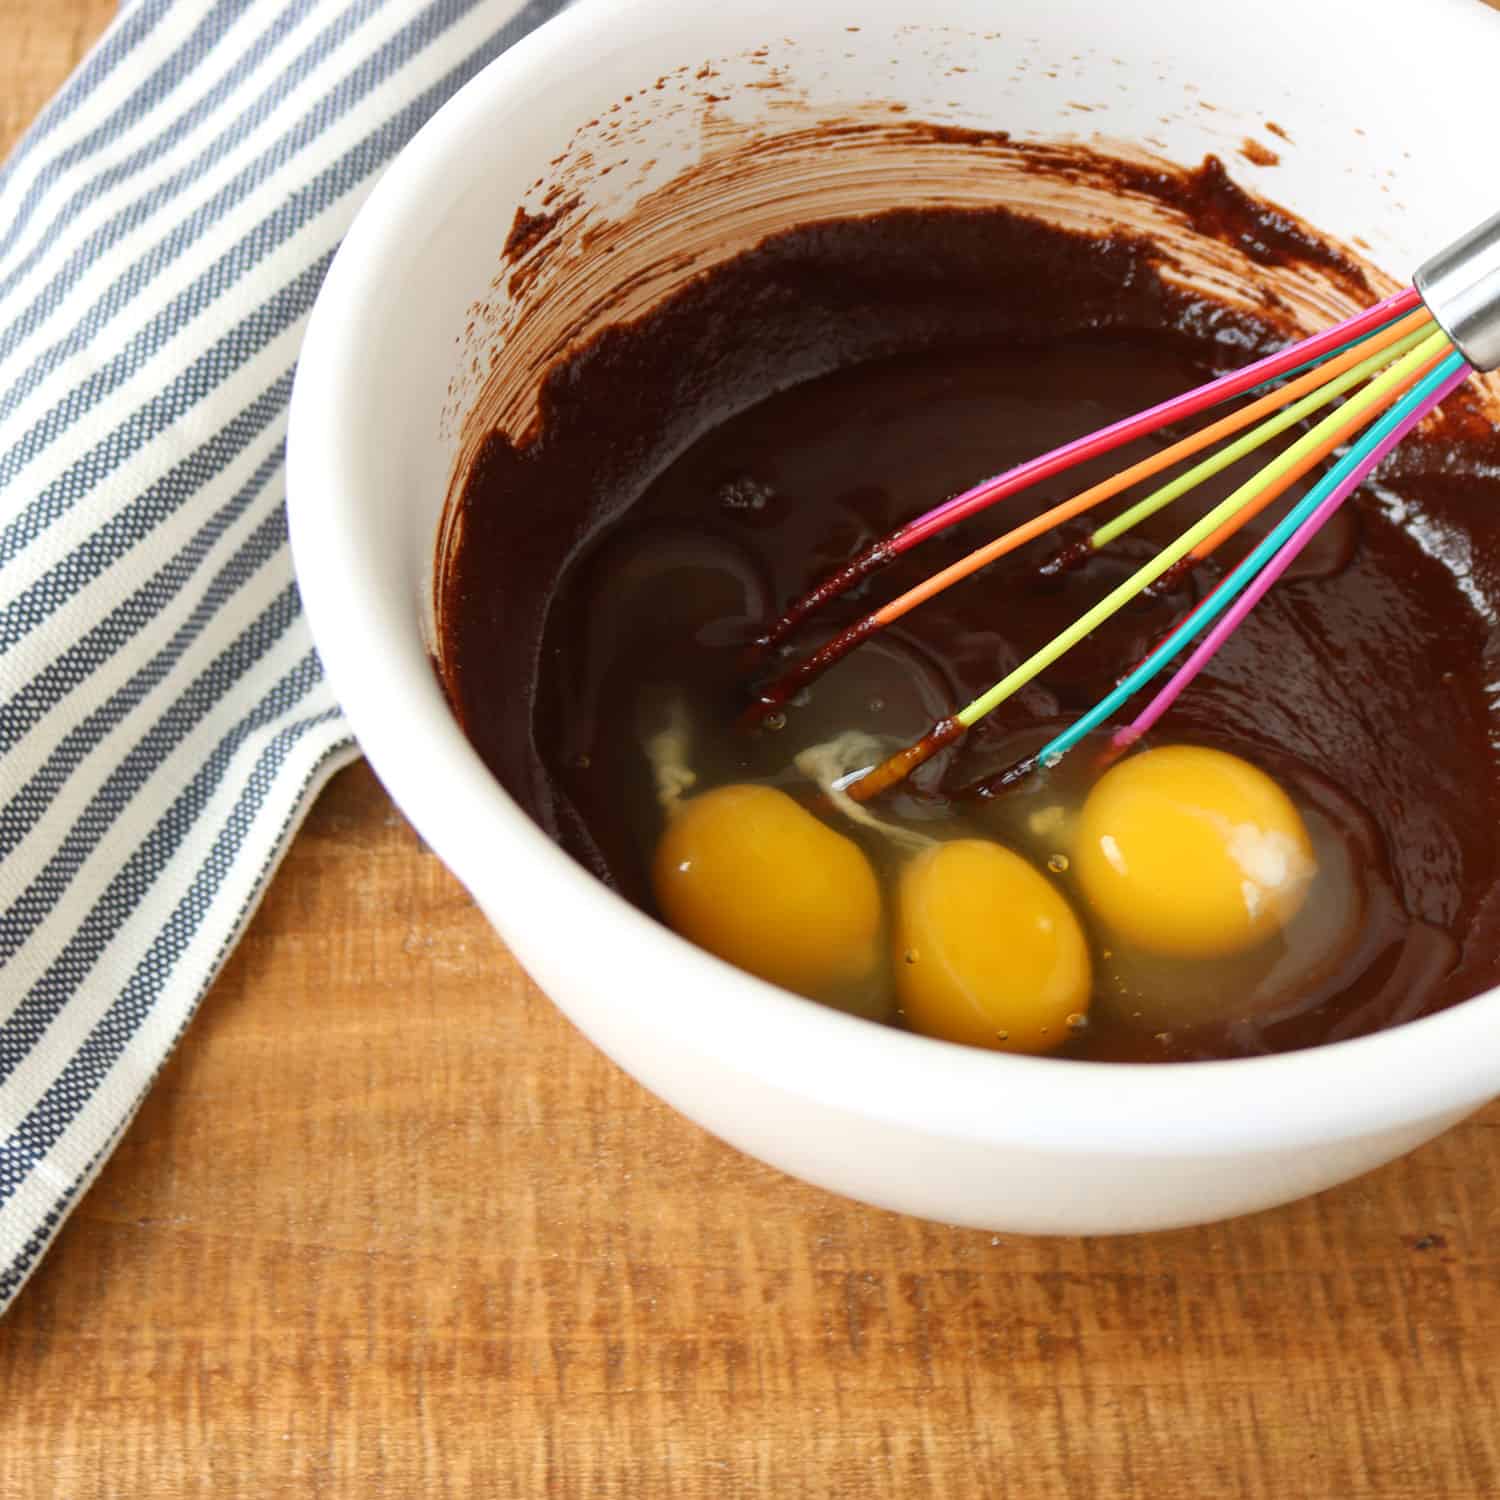 chocolate gluten free cake mixture with three raw eggs in a white bowl with a rainbow-colored whisk